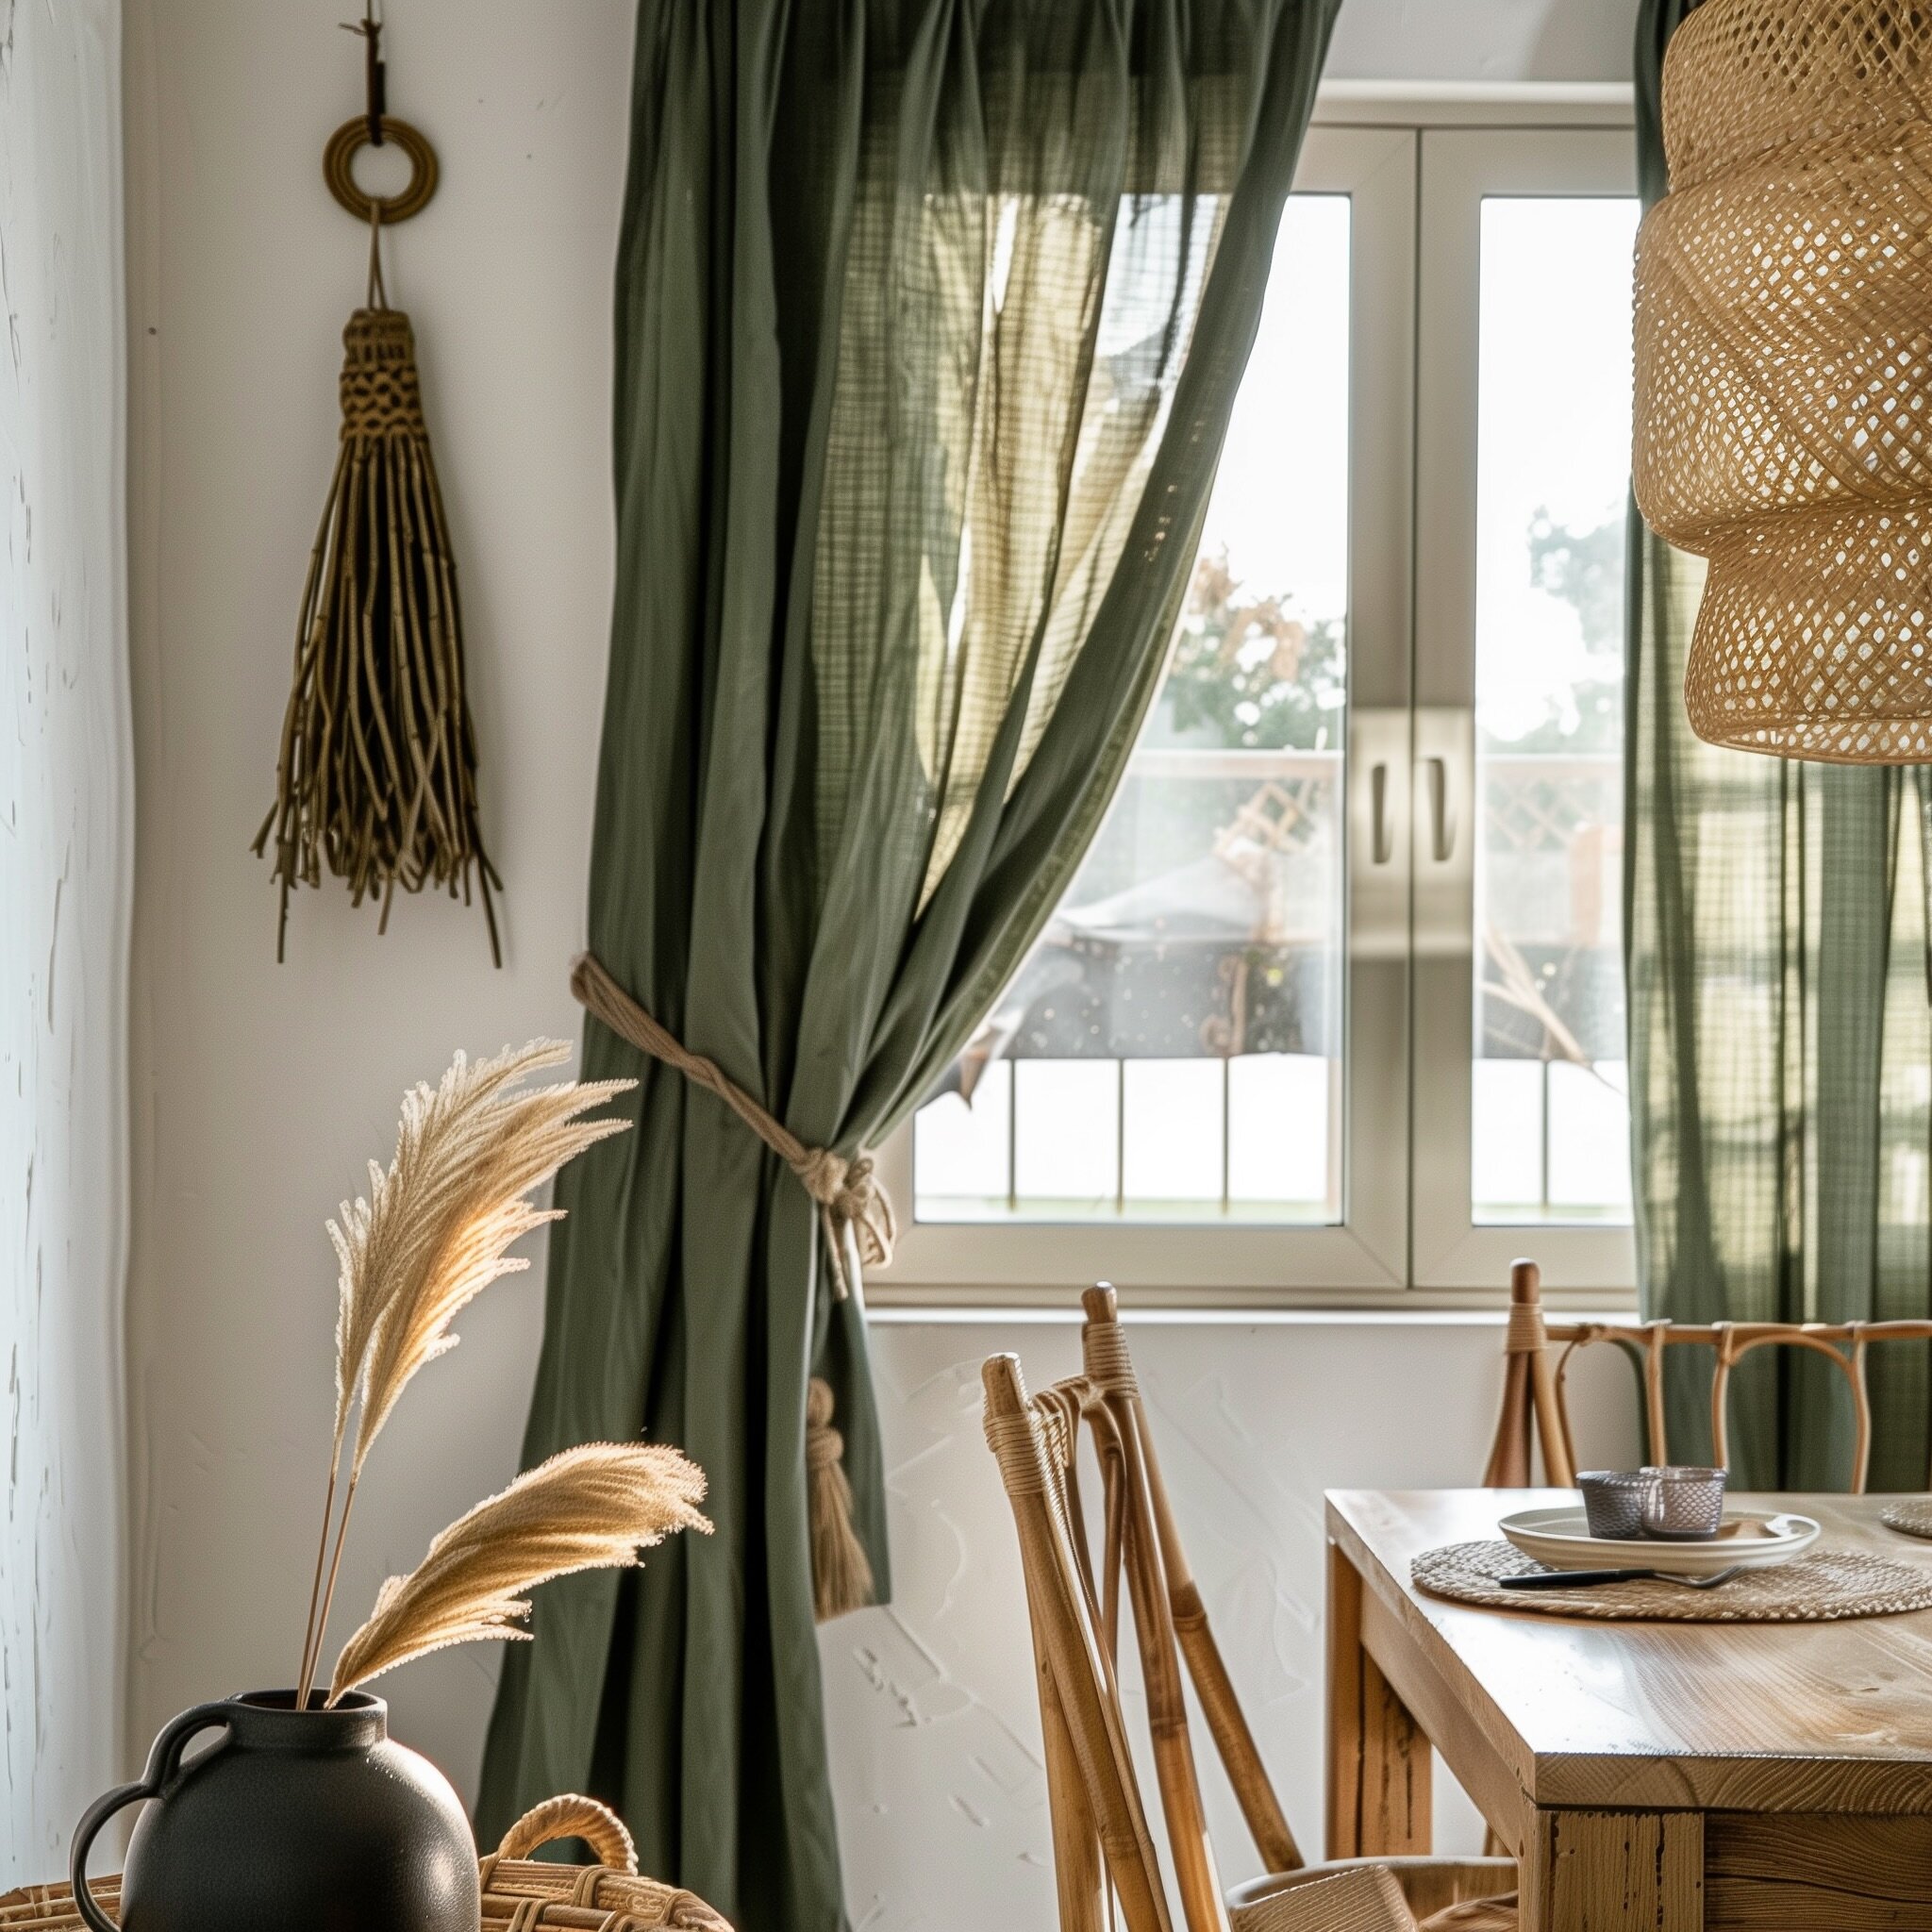 🌿🌸Boho Chic Vibes with Green Curtains

Transform your space into a Boho Chic heaven with the enchanting touch of green curtains! 🌿 Let the earthy hues and natural textures of green drapes infuse your home with eclectic charm and free-spirited eleg